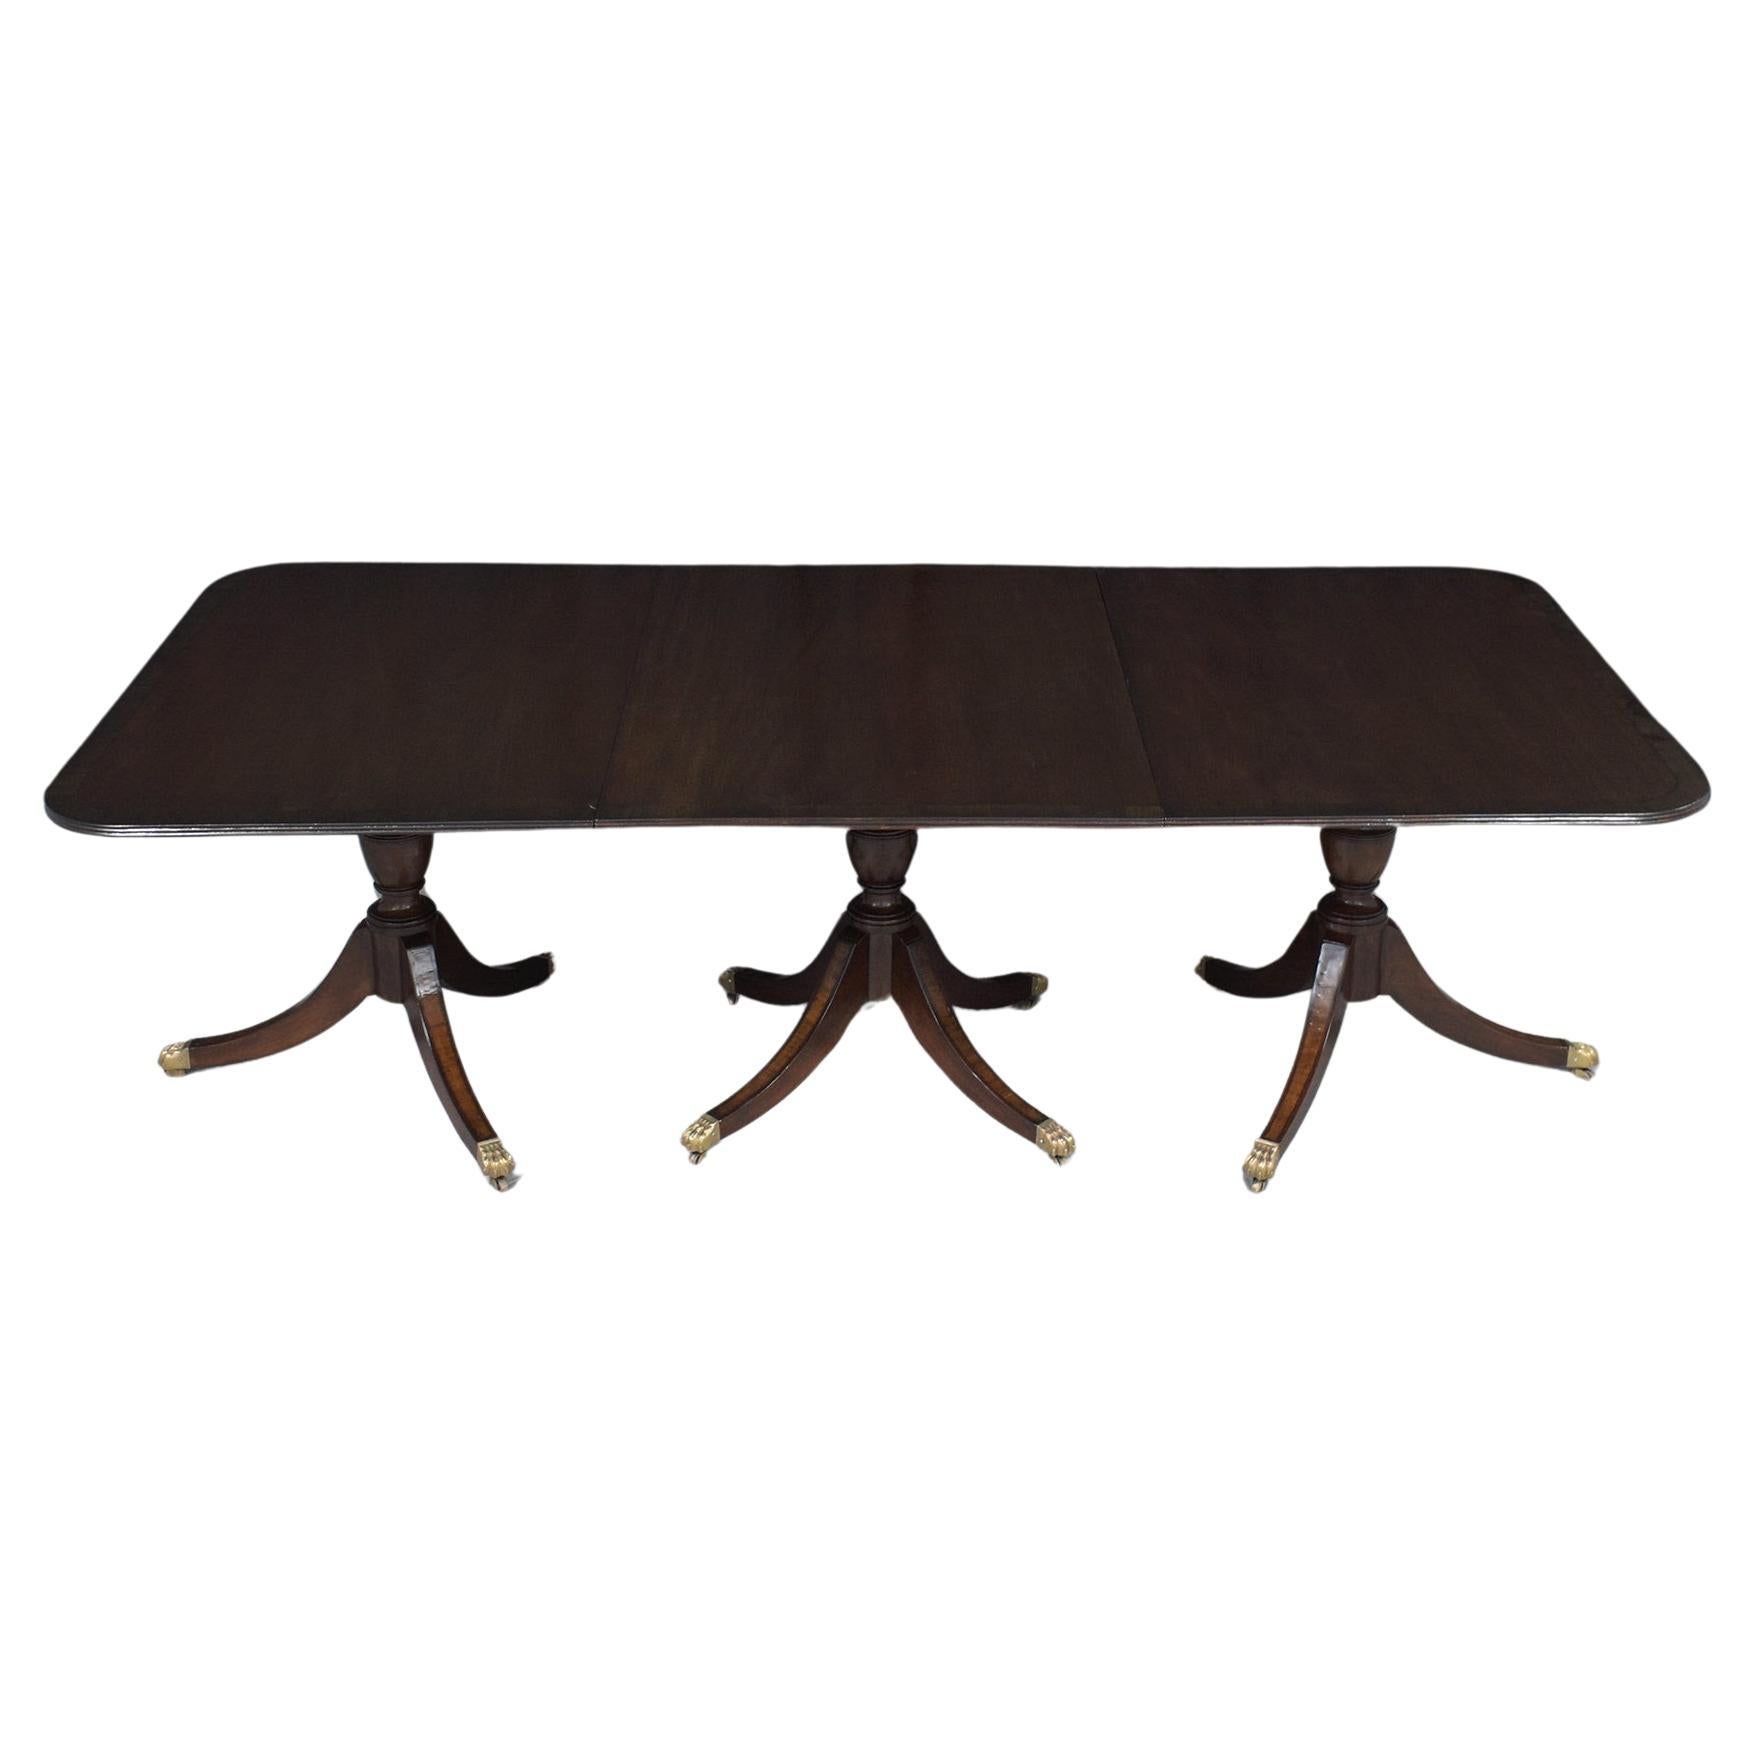 Restored 1890s George III Mahogany Dining Table with Extendable Leaves